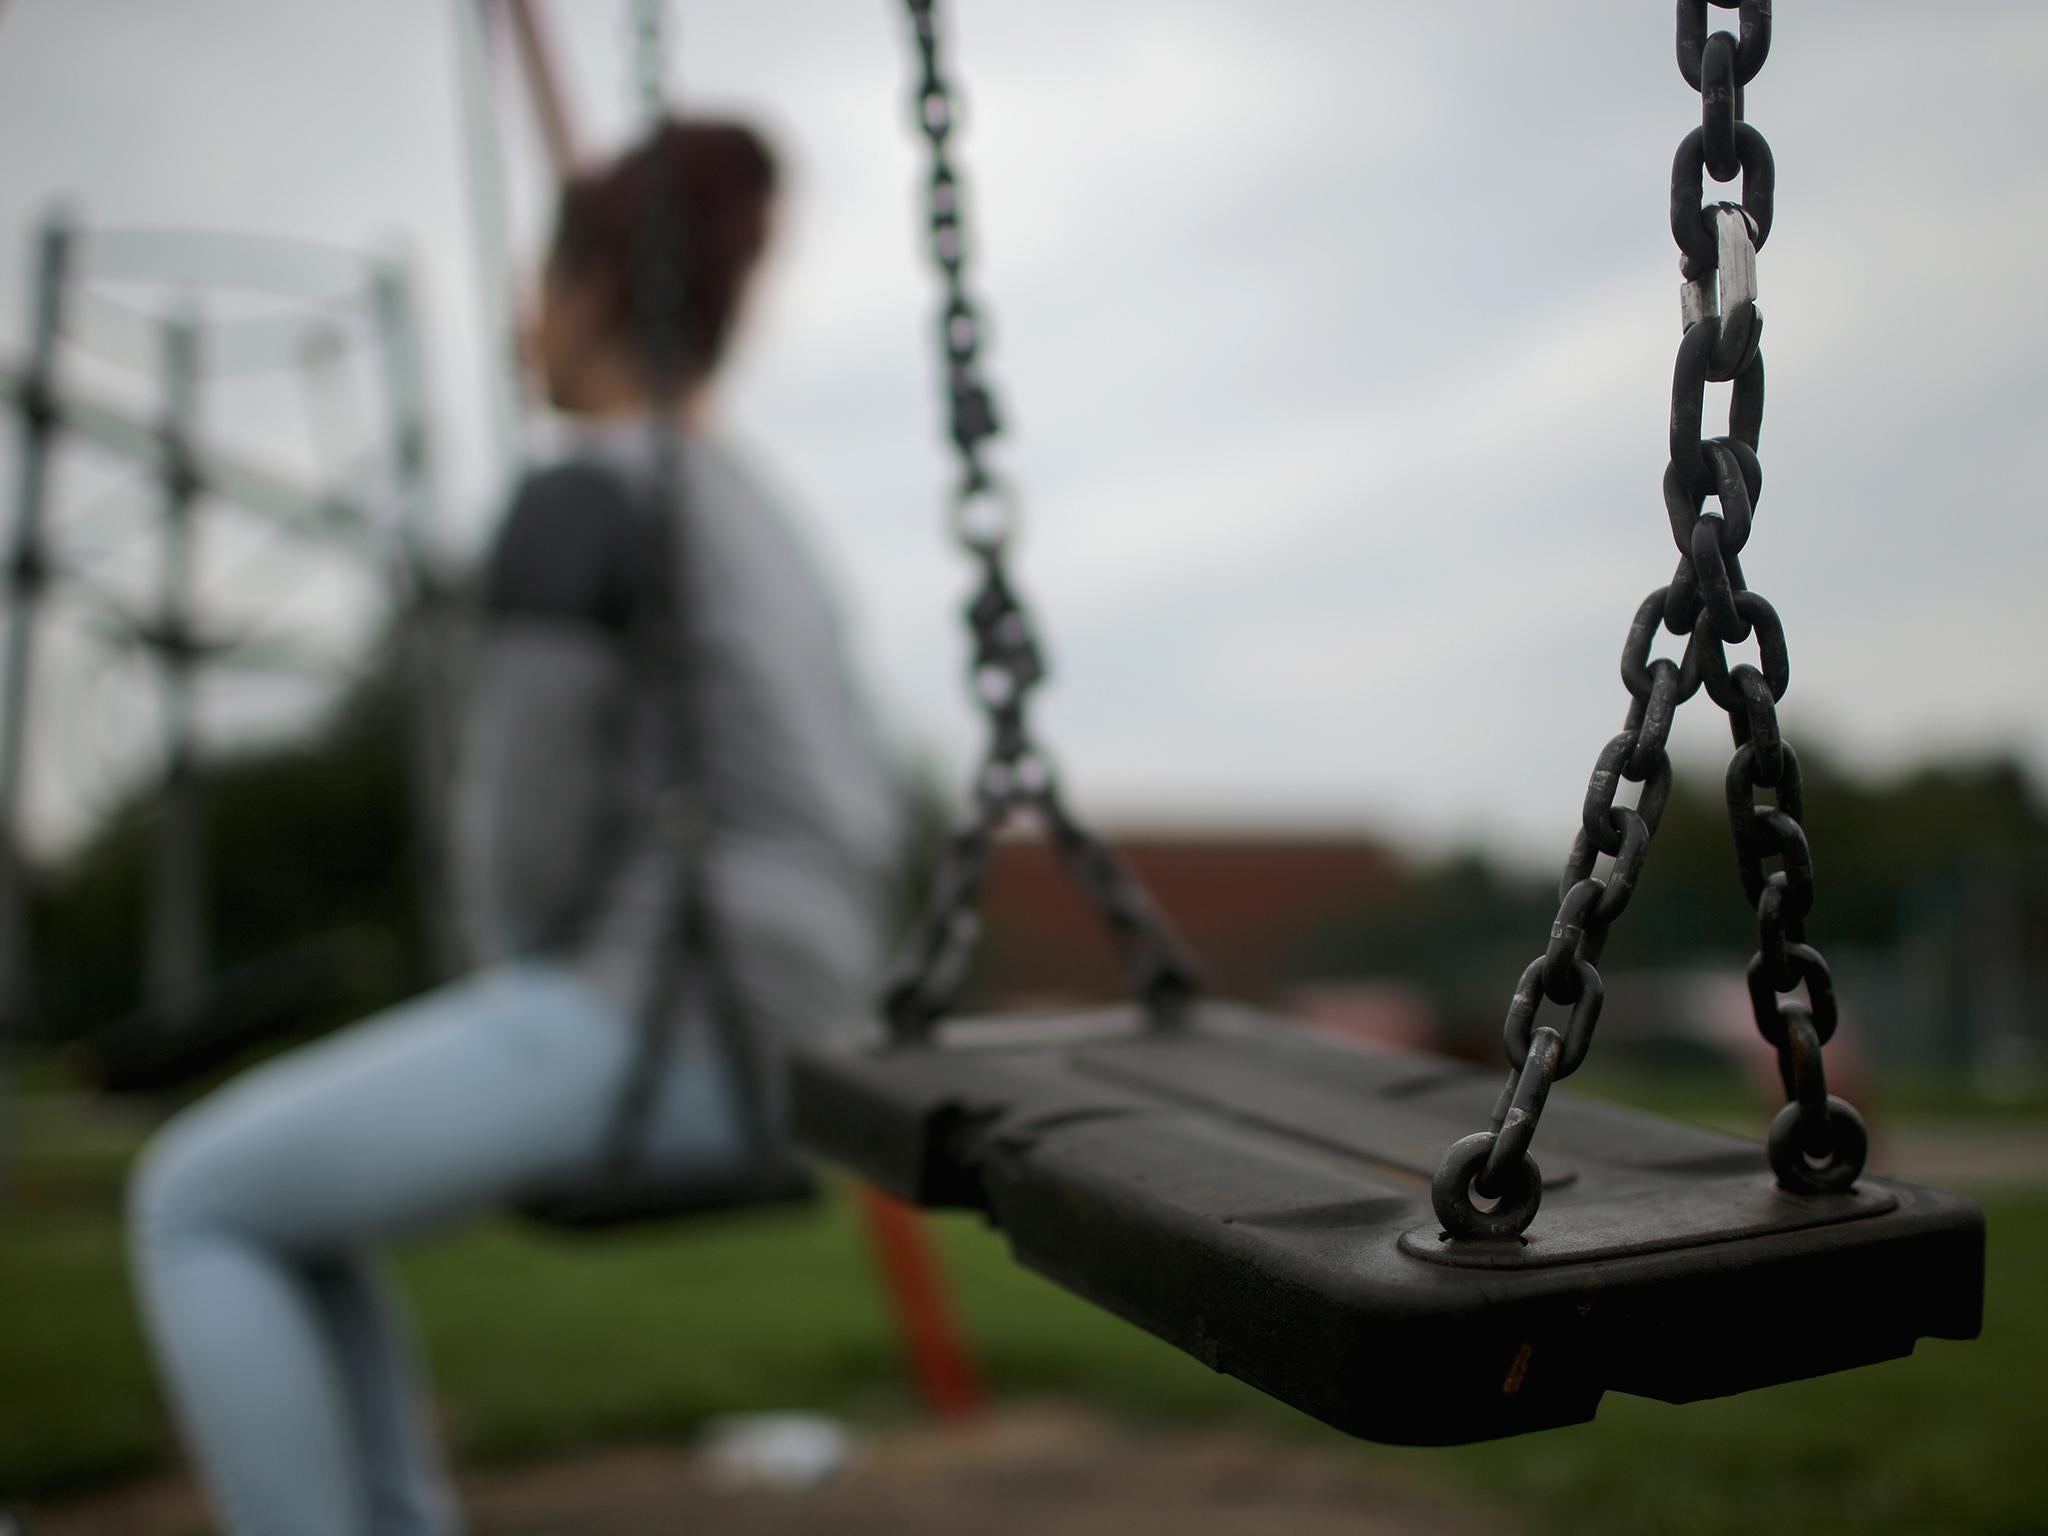 The number of offences where professionals such as teachers, care staff and youth justice workers targeted 16- and 17-year-olds in their care for sex rose to 290 in the year to June – up from 159 three years ago